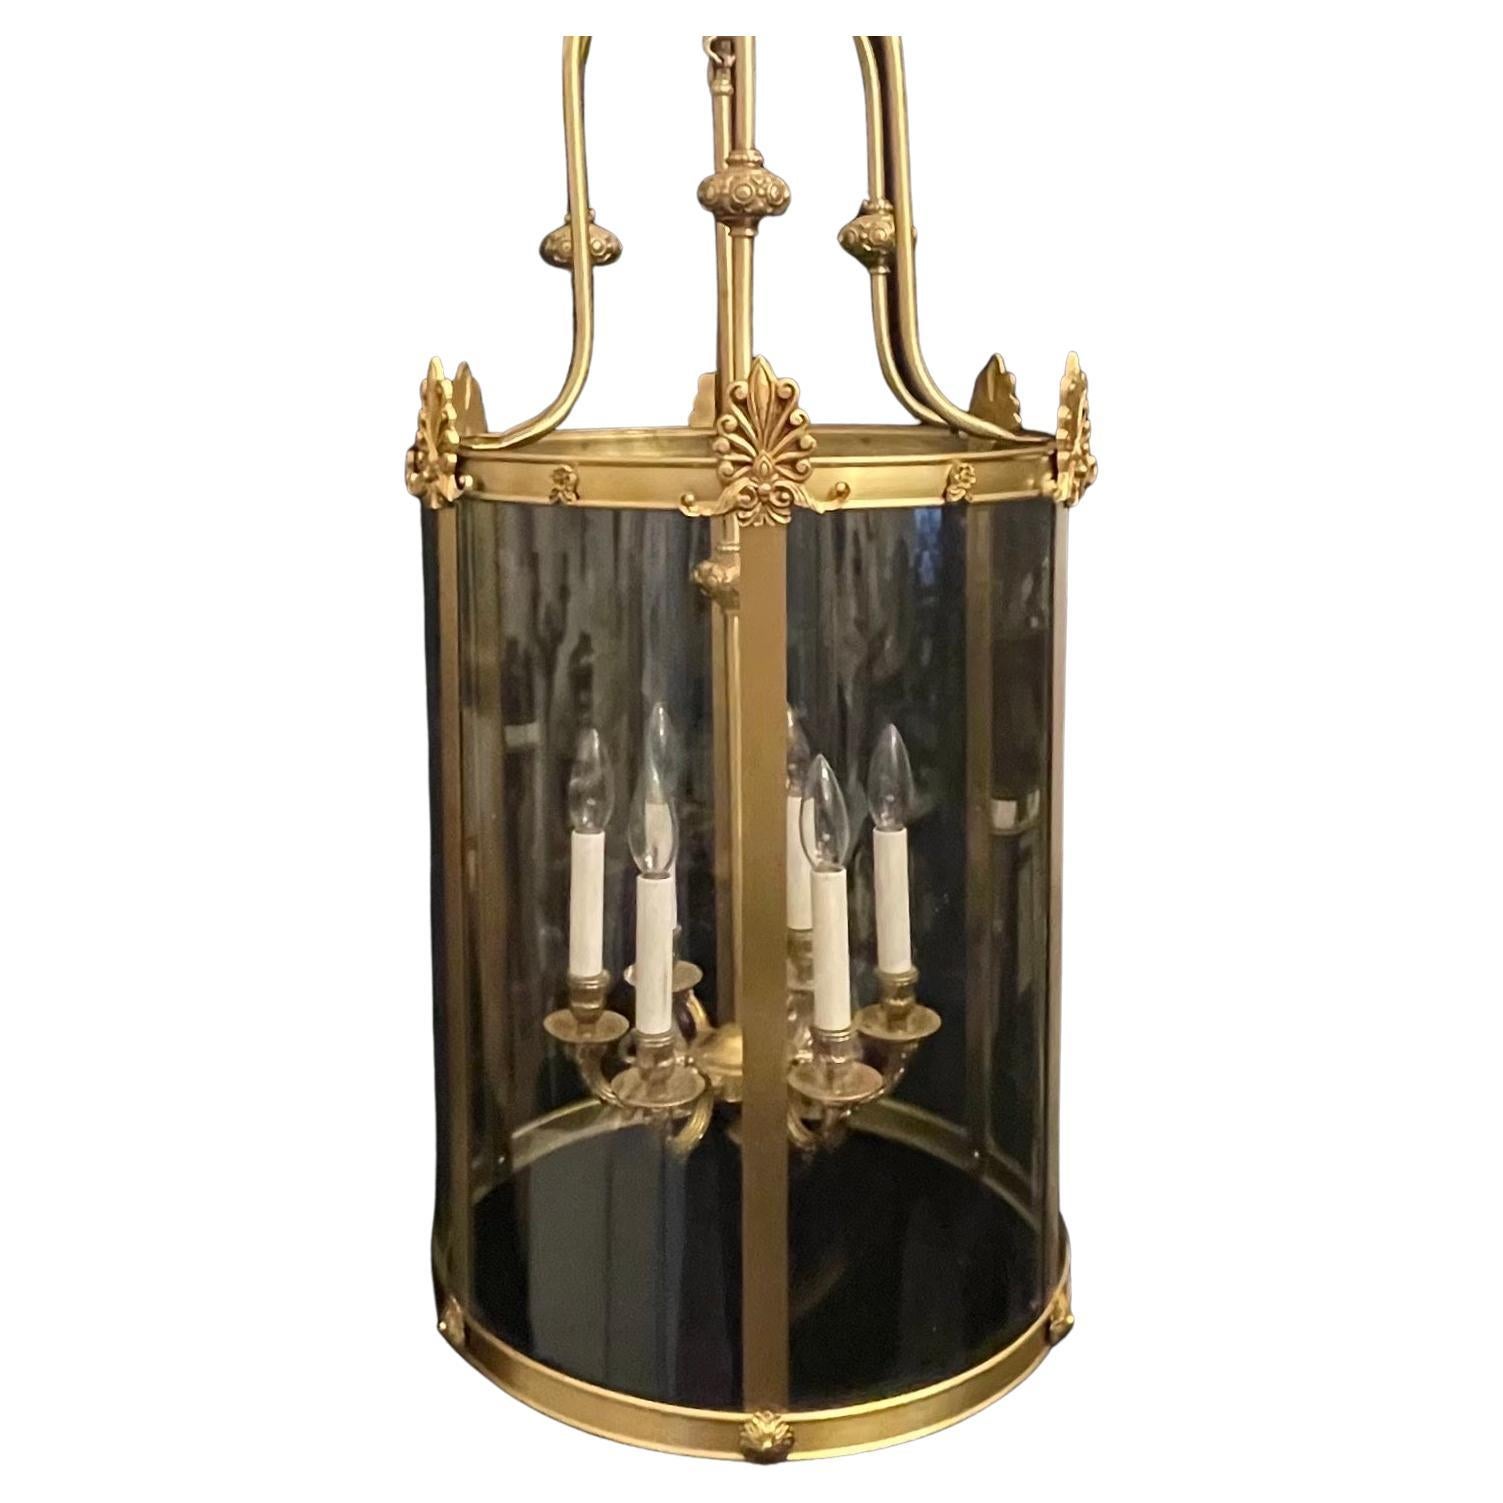 A wonderful large French bronze Regency / Empire style curved glass panel lantern light fixture with 6 candelabra lights.